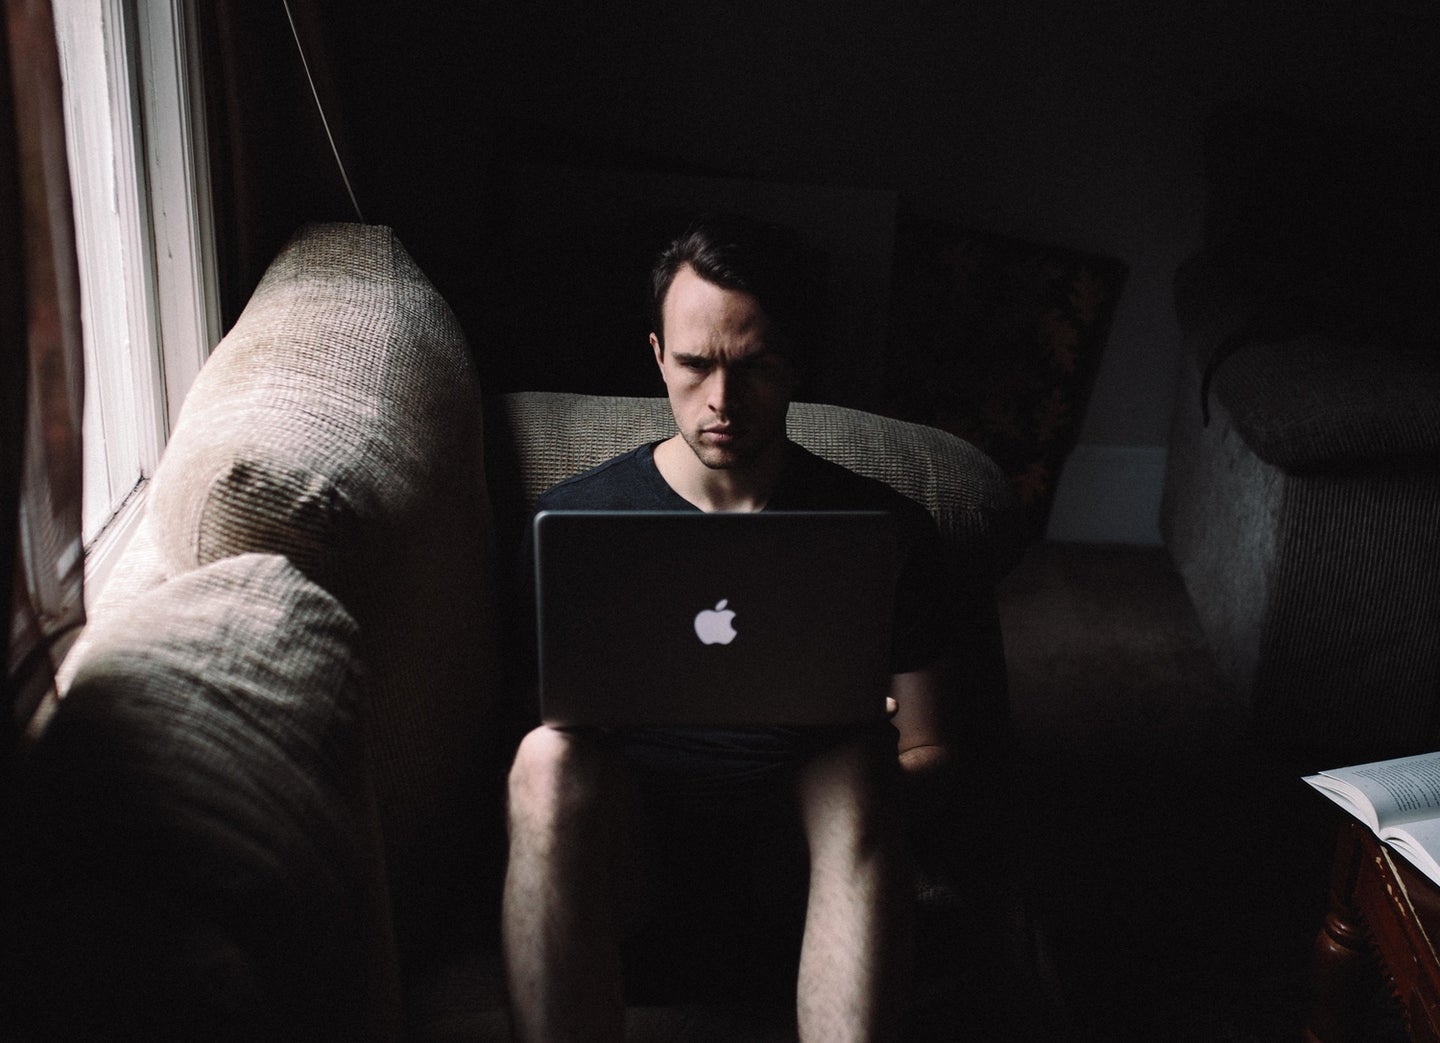 A man sitting solemnly on a couch in the dark with his Apple Mac laptop